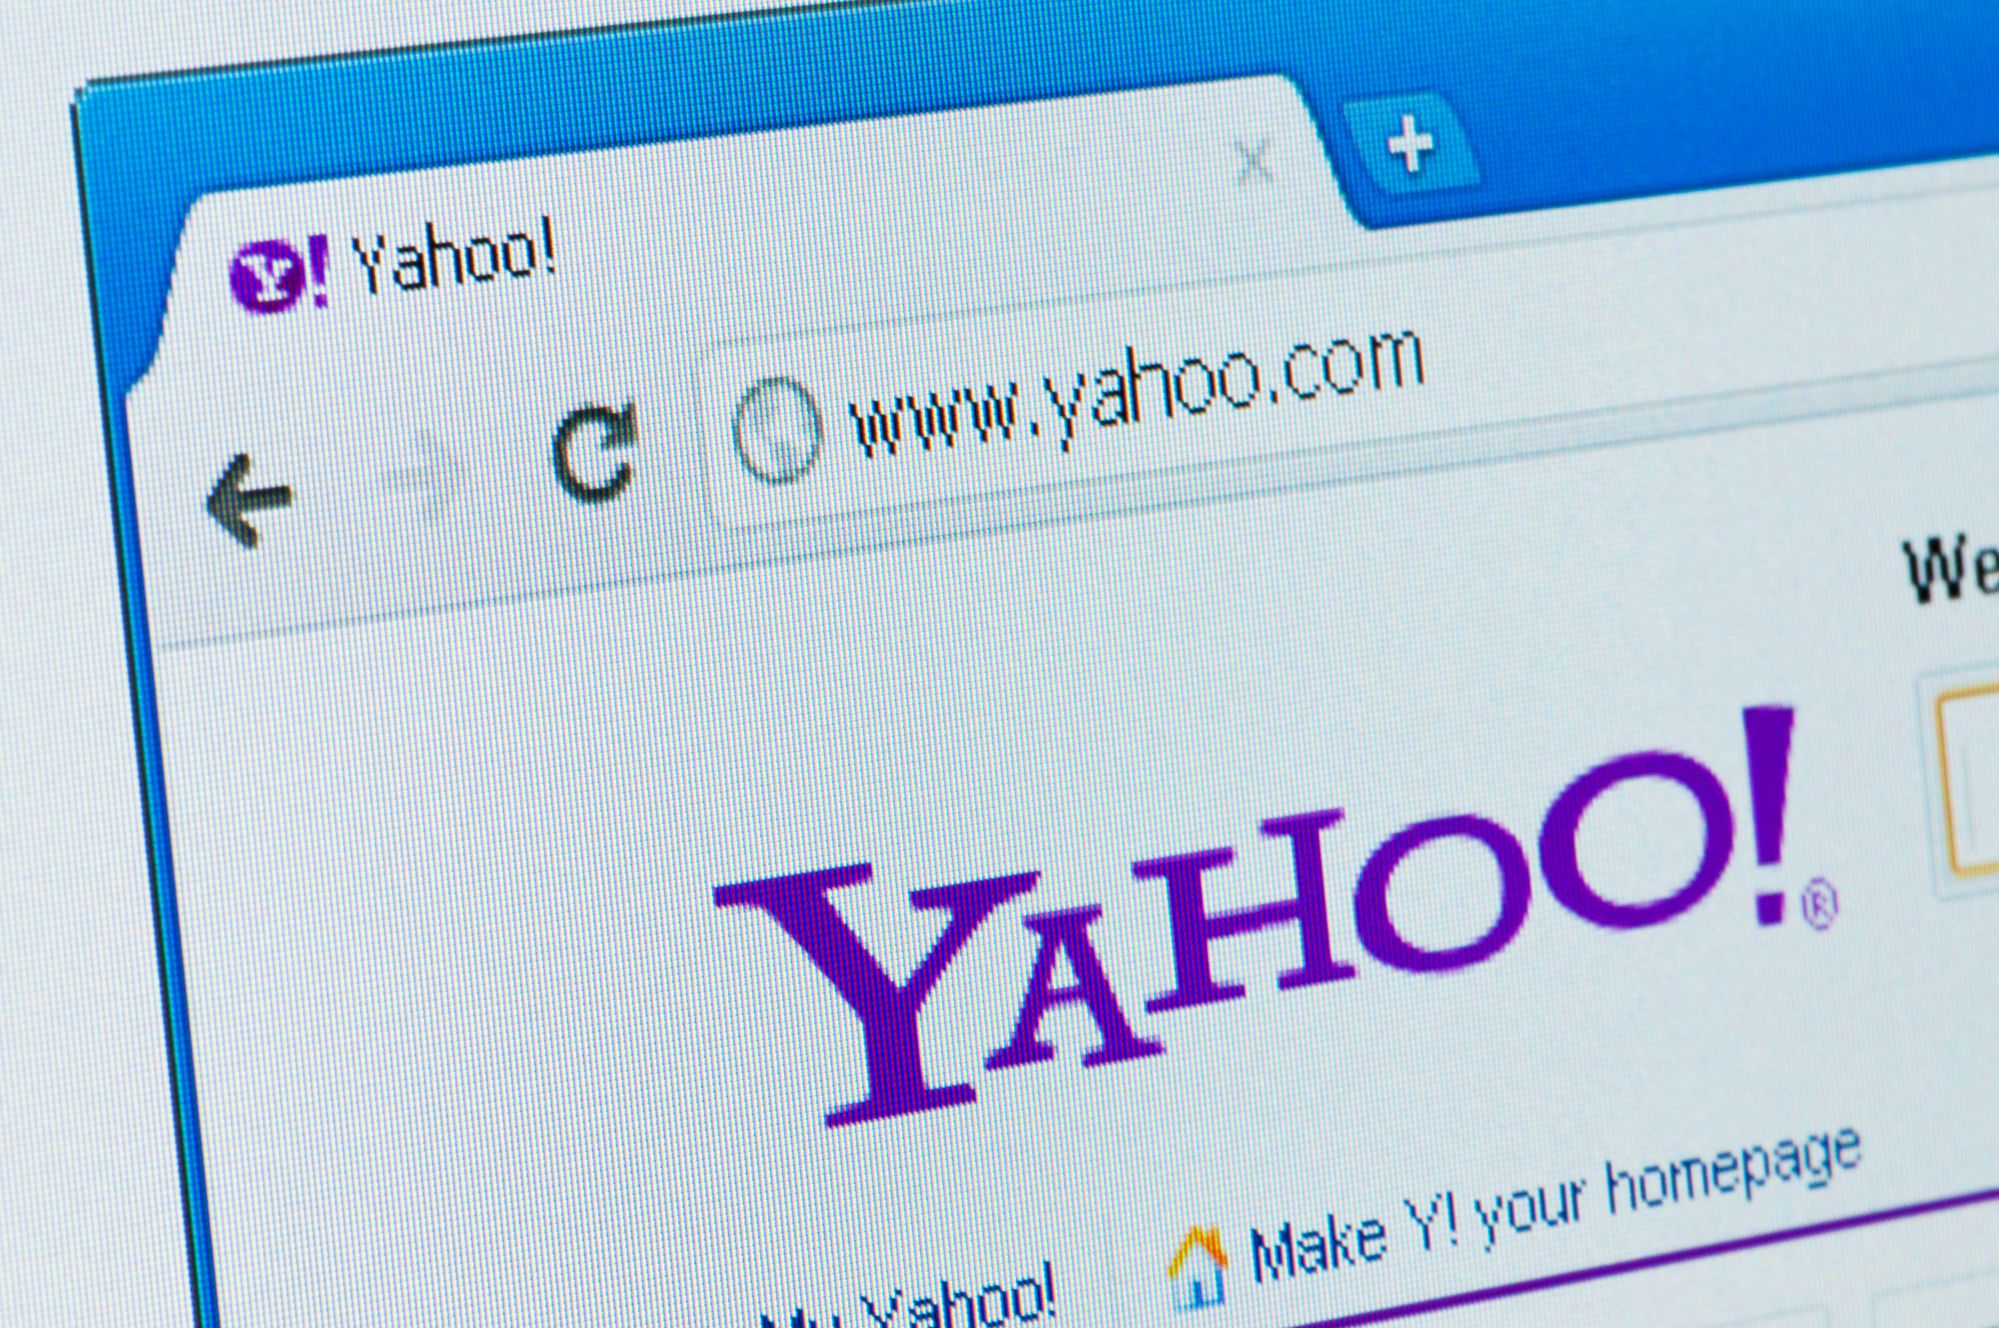 Yahoo Internet portal and e-mail service start page October 20,